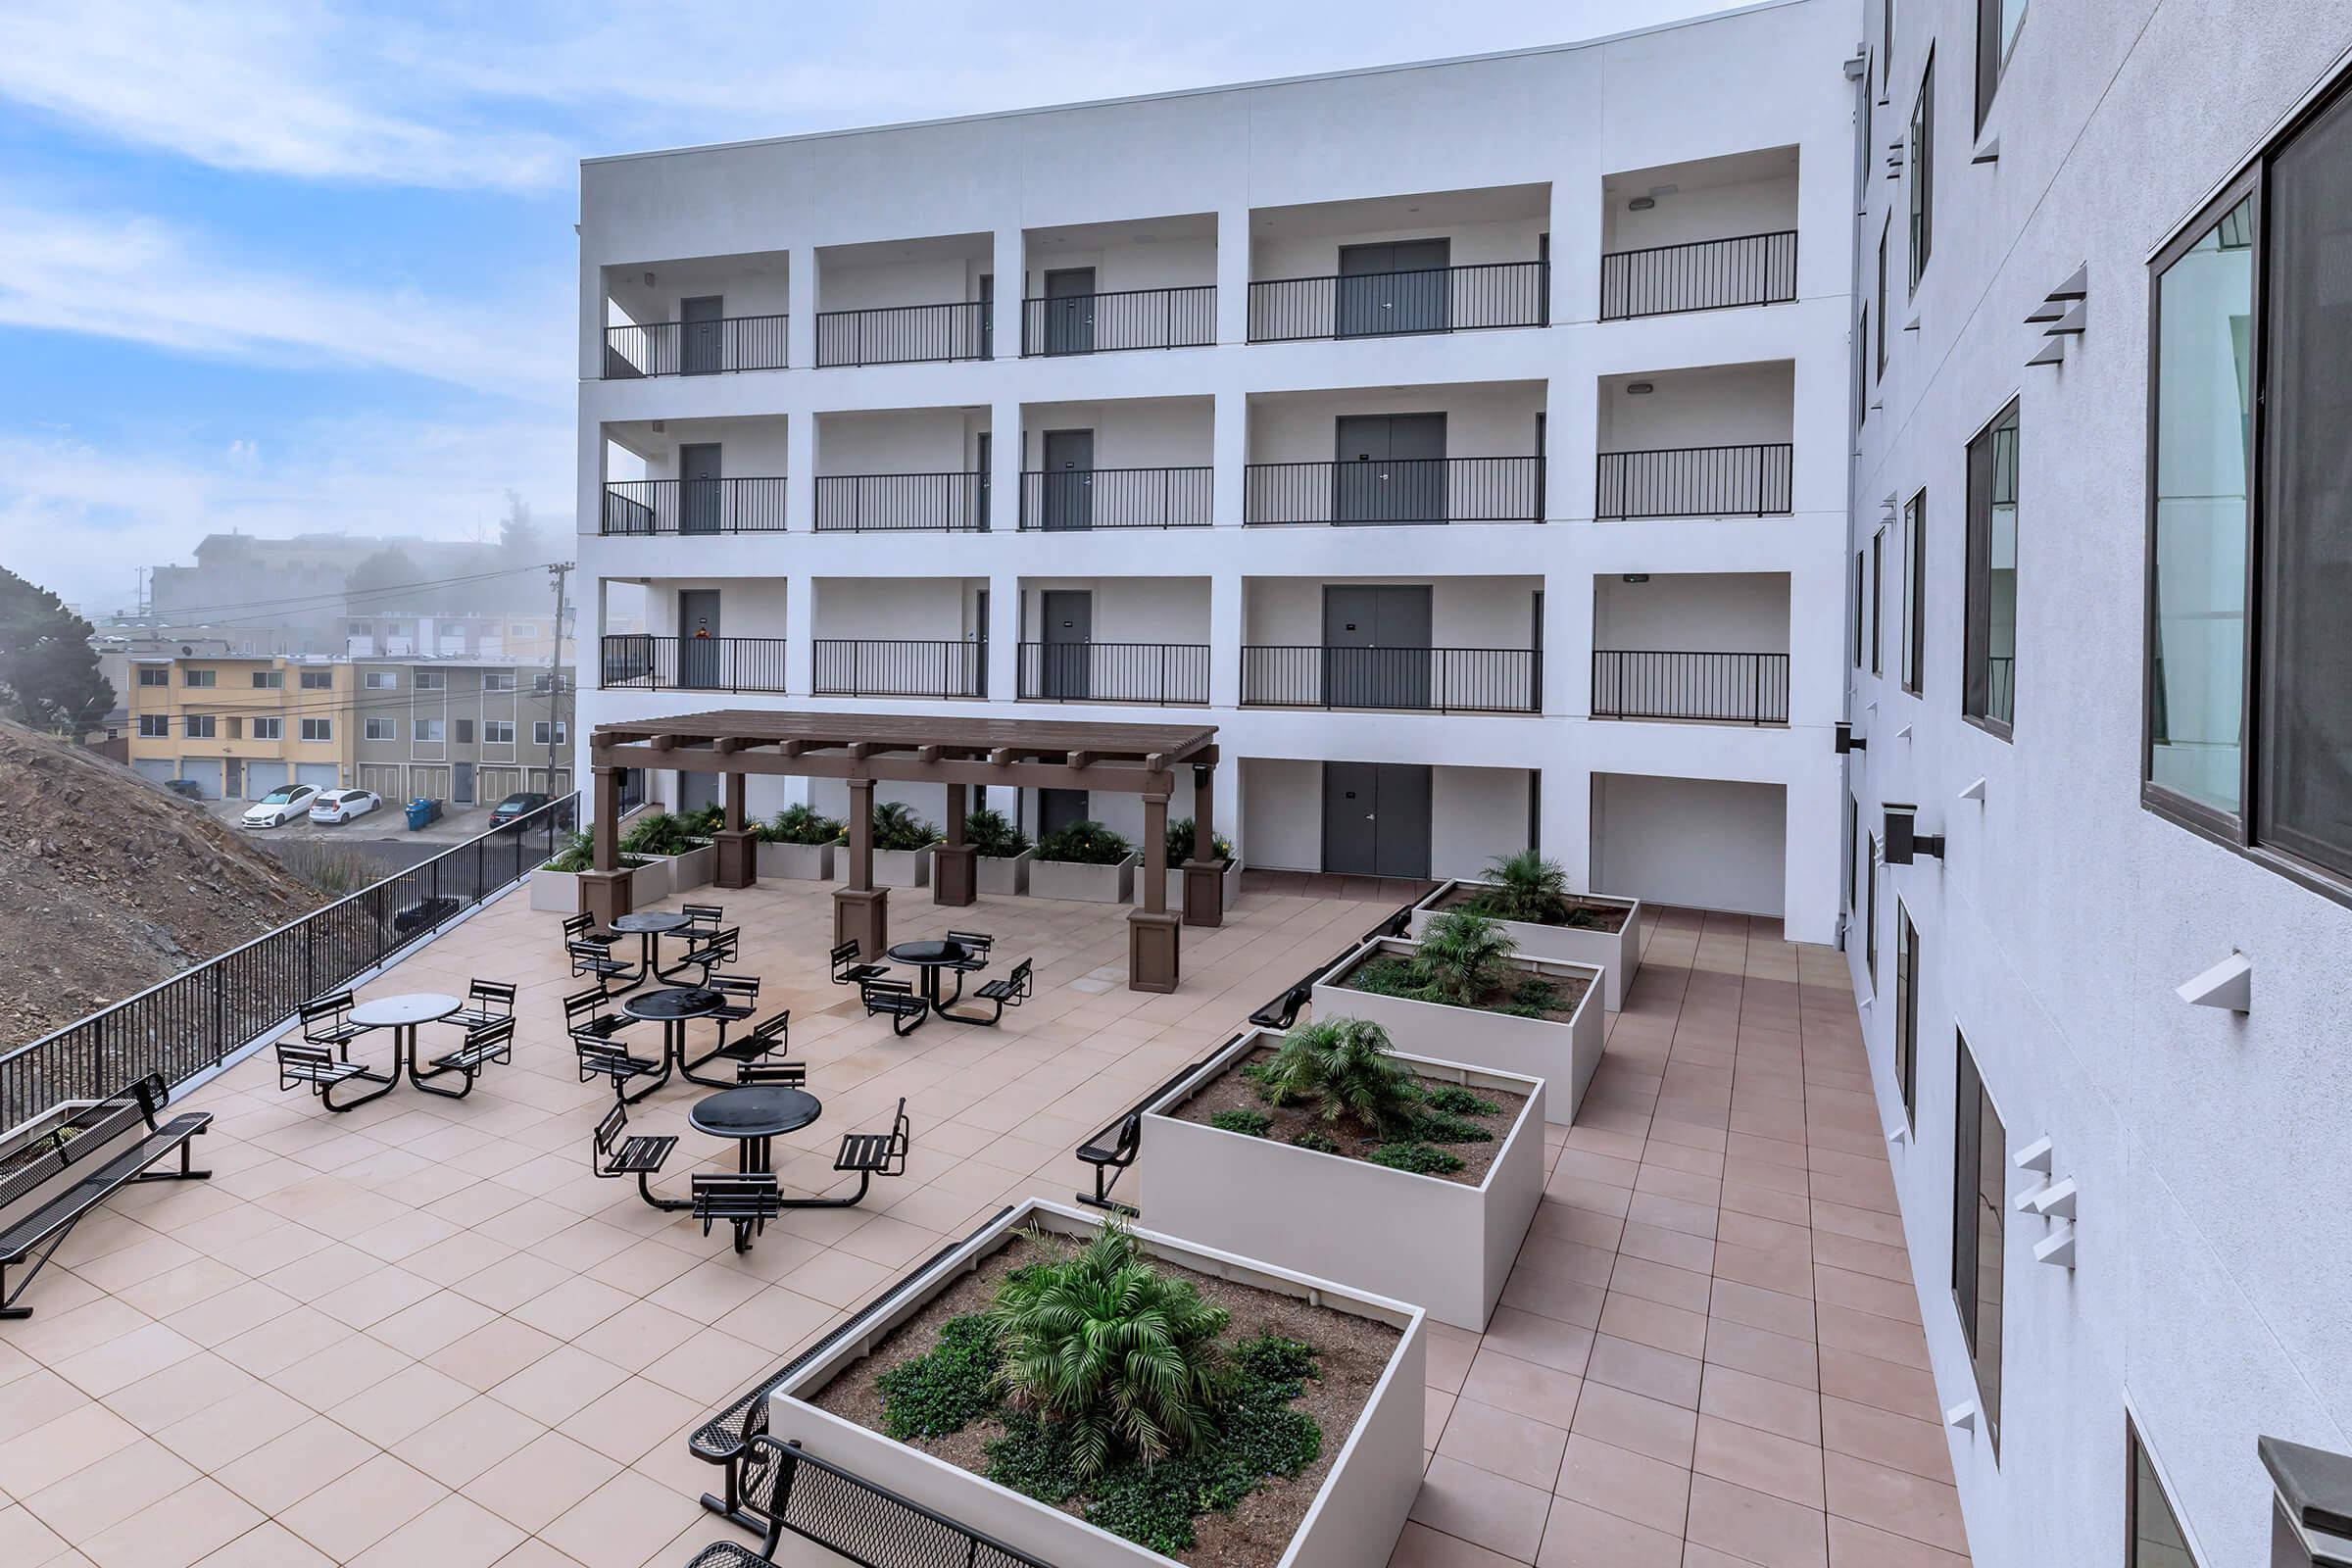 Apartments in Daly City For Rent - Brunswick Street Apartments - Outdoor Courtyard With Seating Areas and Tables, Wooden Canopy and Planters surrounded by the Building.